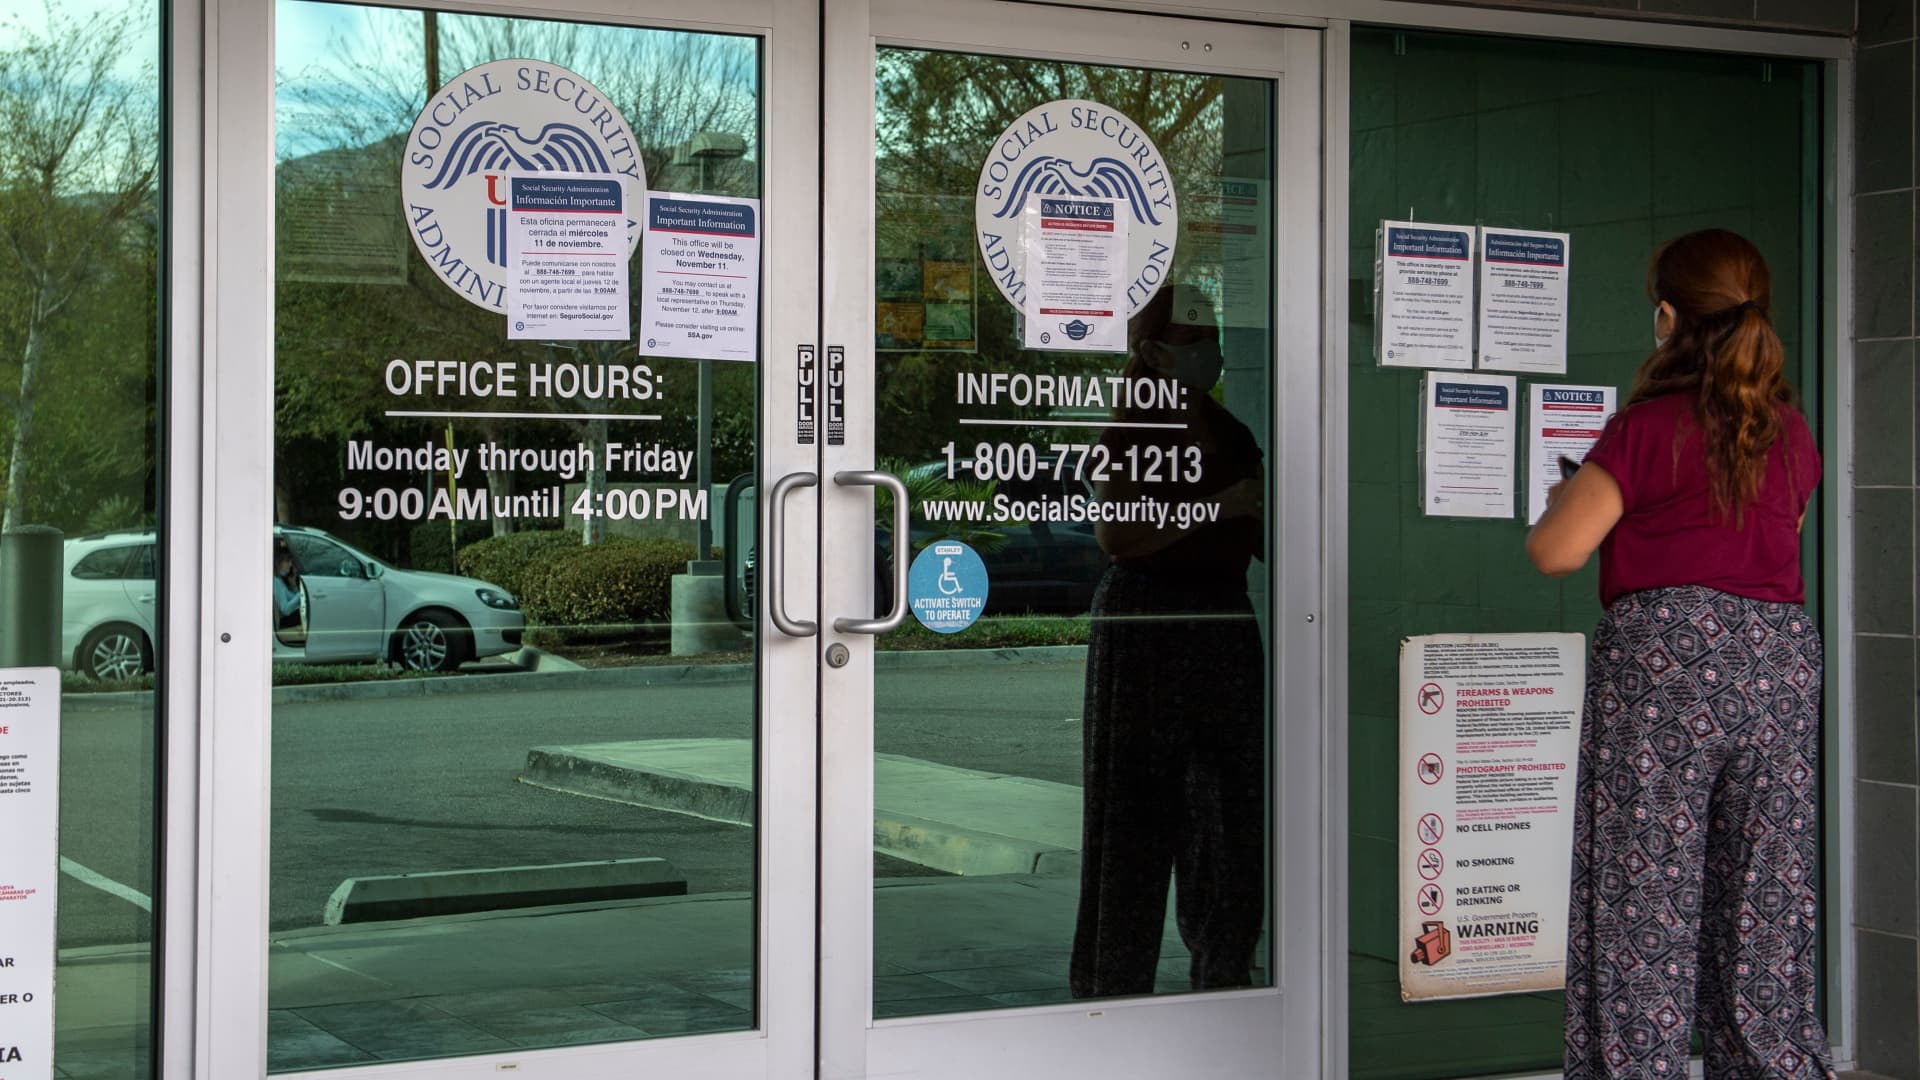 Social Security Administration addressing 'deficiencies' in handling mail during pandemic, says government watchdog report